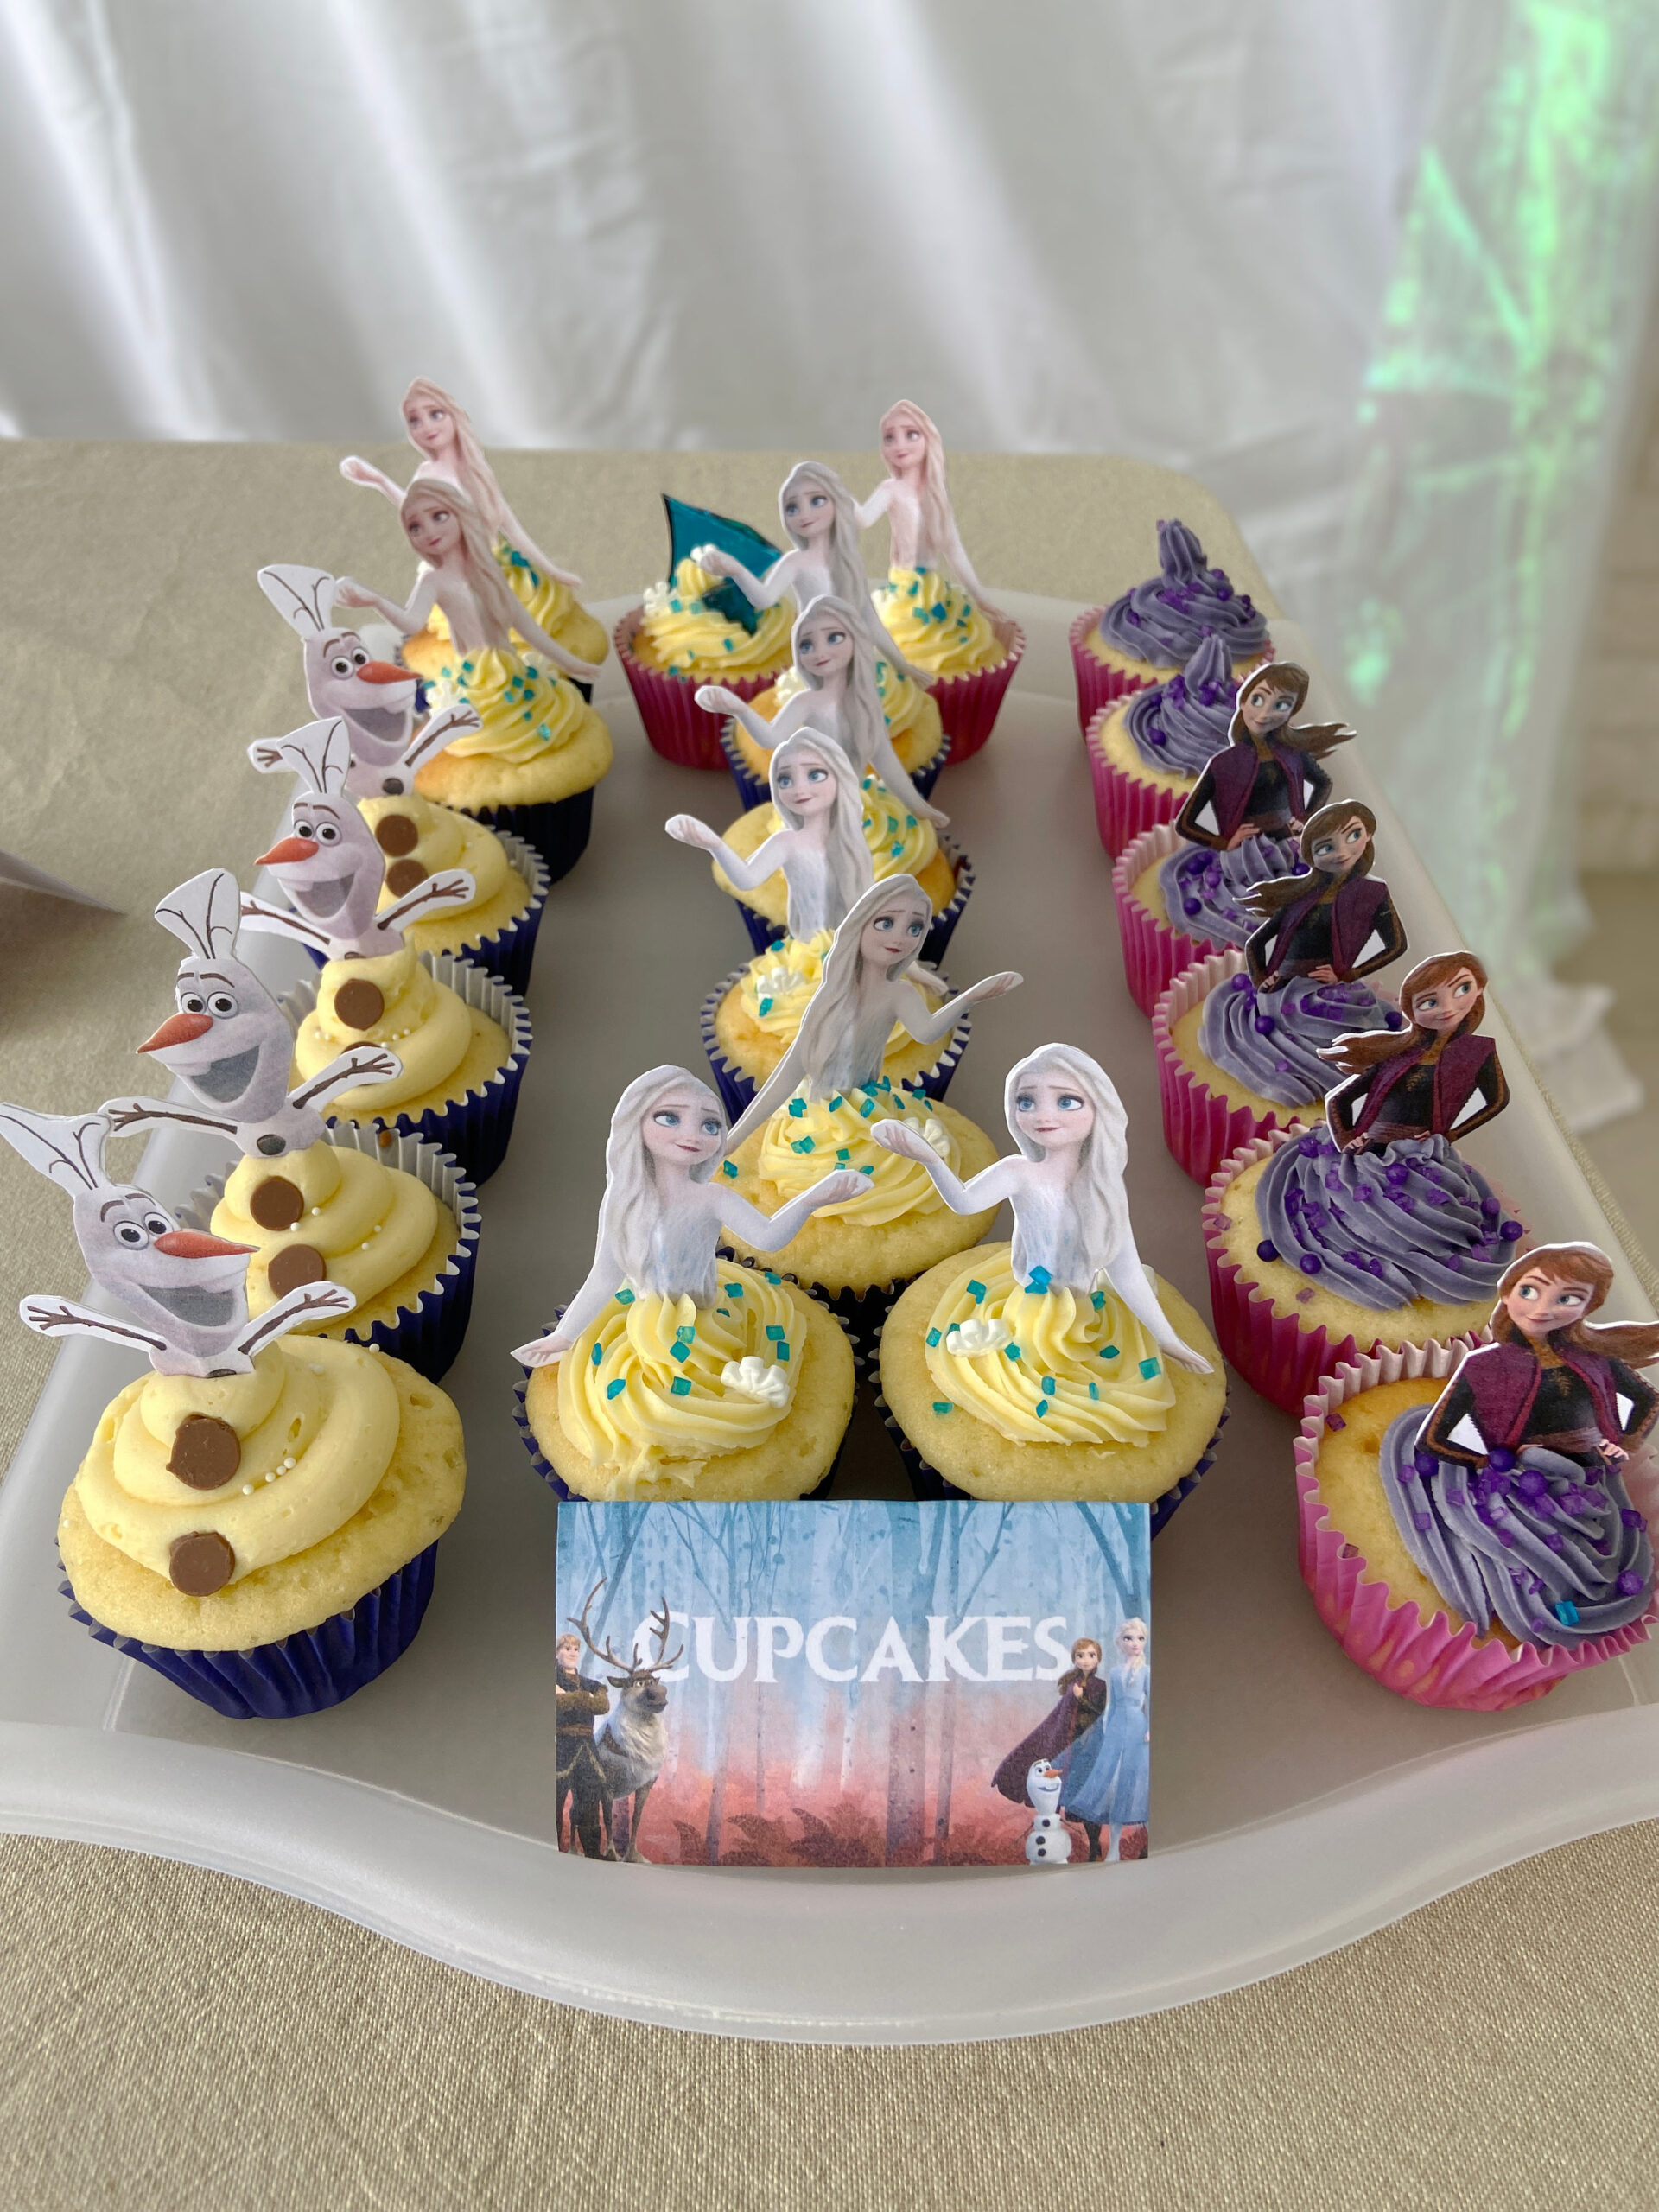 Elsa, Anna and Olaf Cupcakes Frozen Themed Party Food